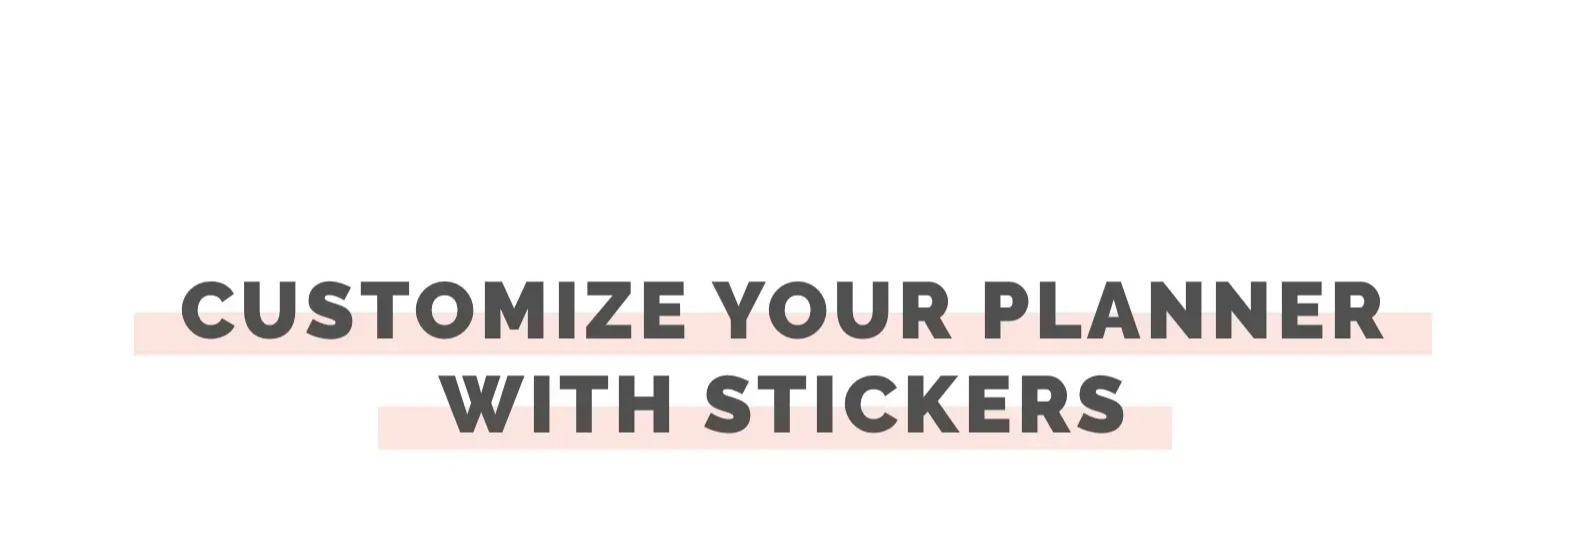 customize your planner with stickers